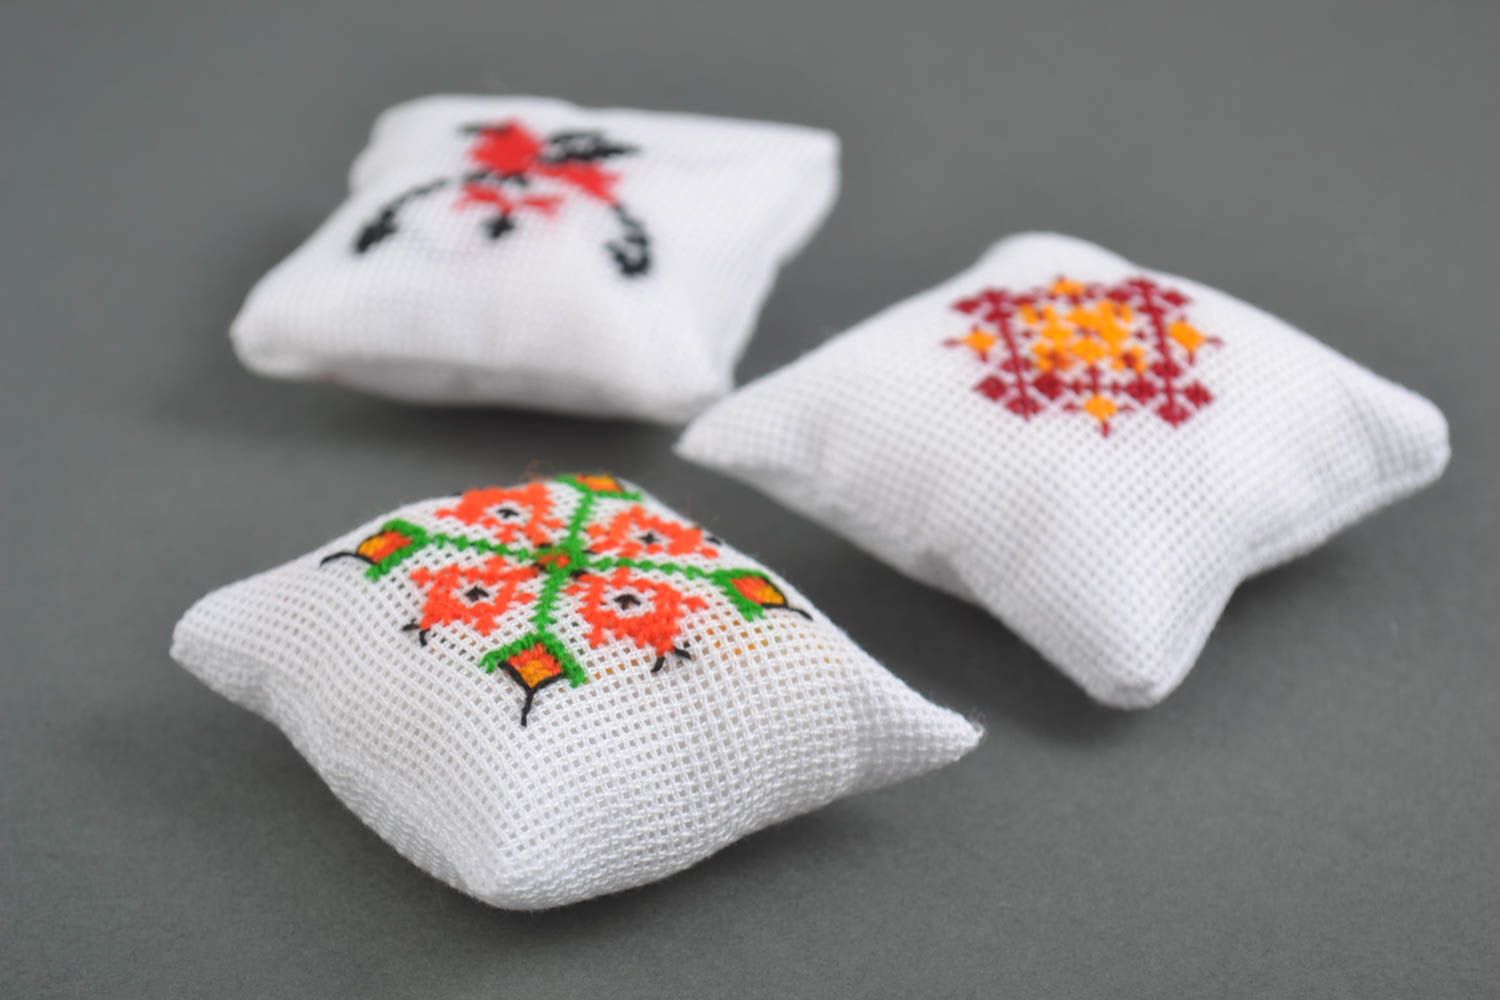 Handmade pin cushions sewing accessories 3 needle holders embroidery supplies photo 4